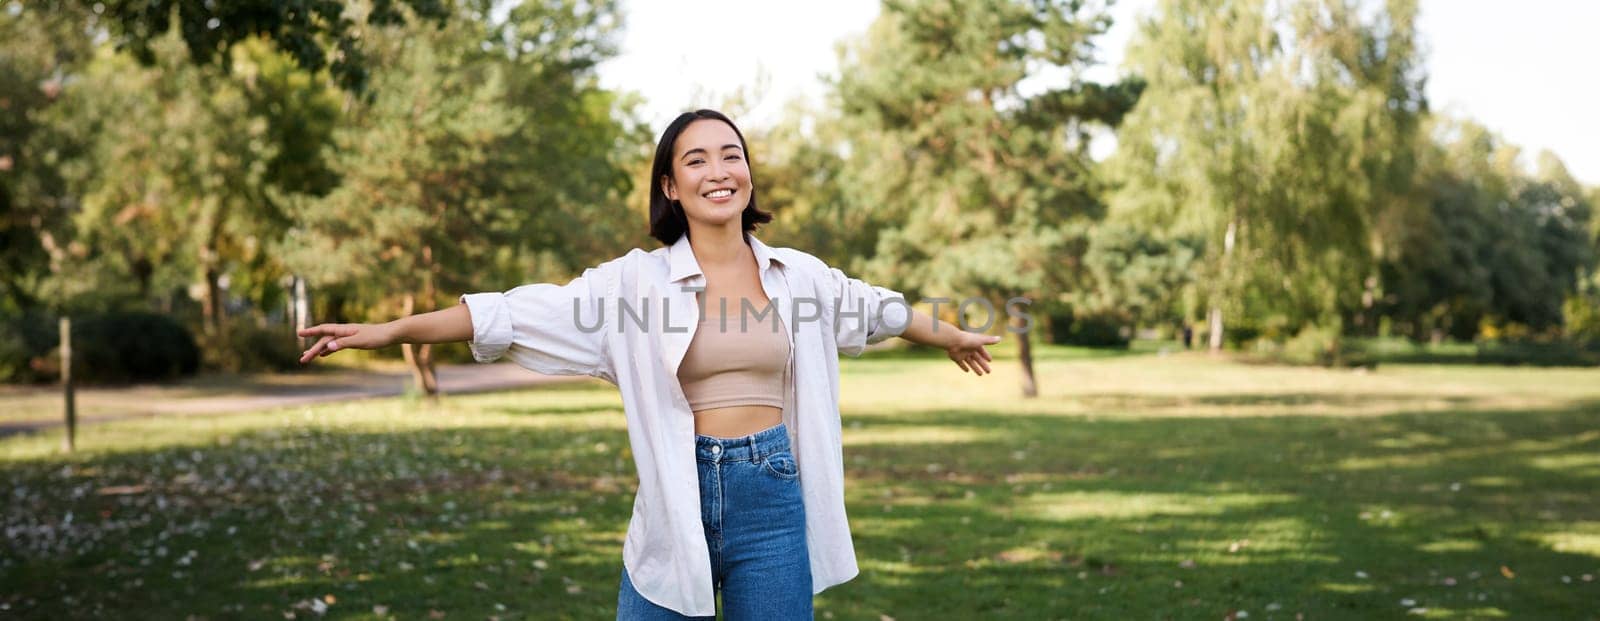 Happy asian girl dancing in park, feeling freedom and joy, walking outdoors on sunny day.